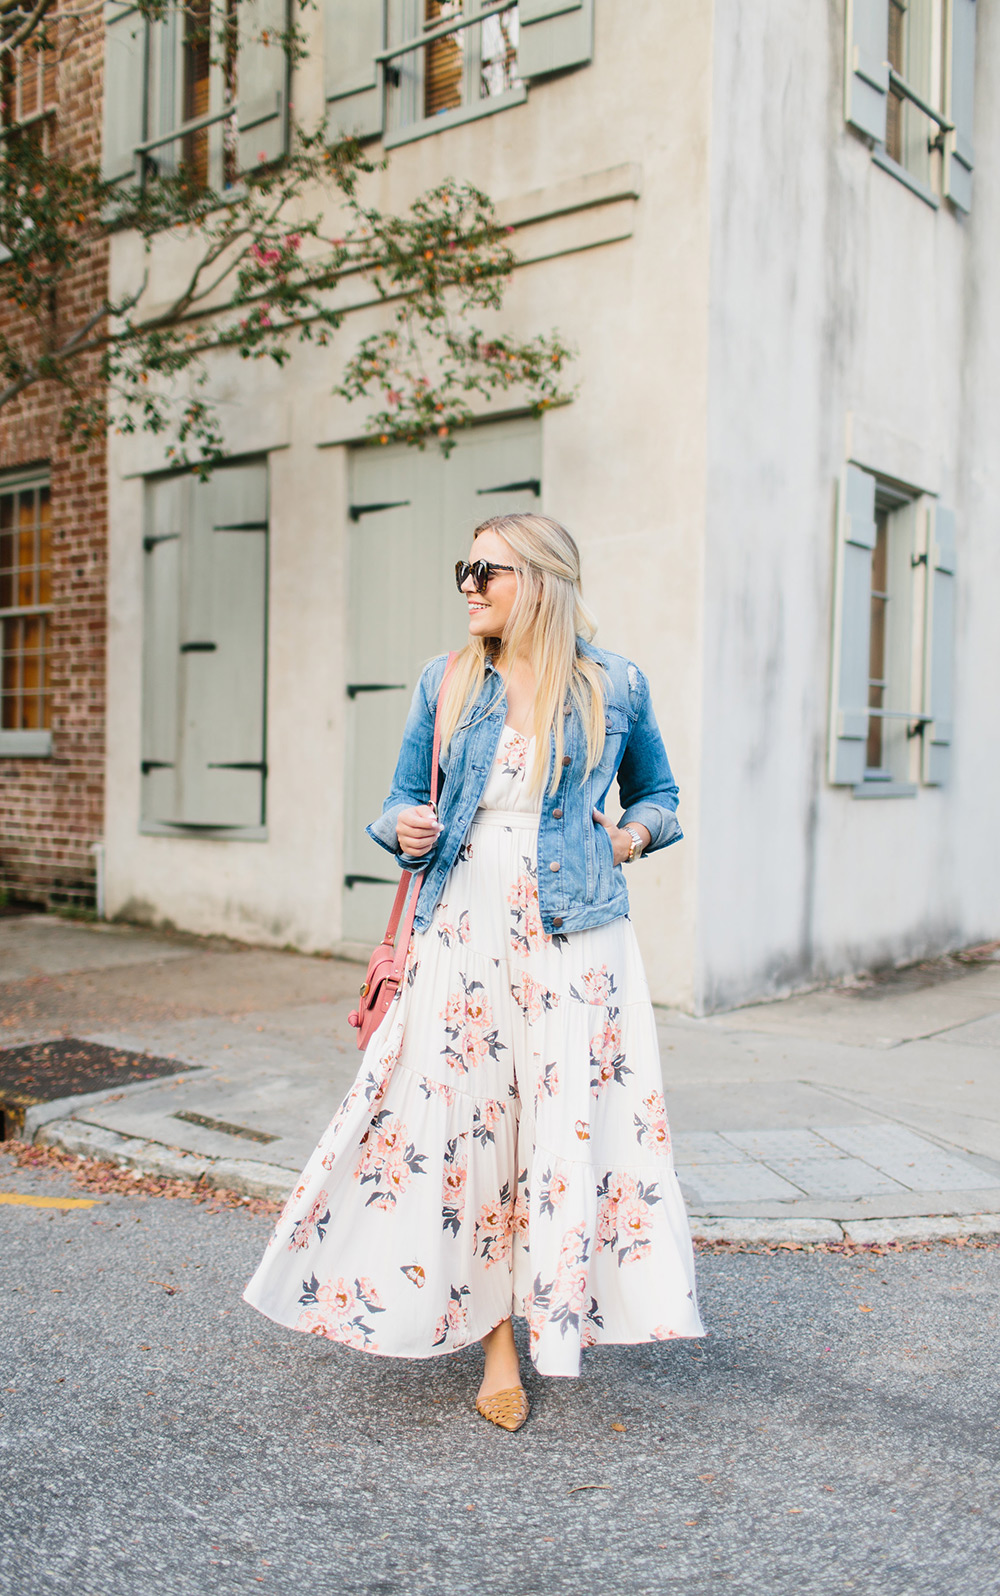 Summer Dress Transitioned to Fall with Denim Jacket